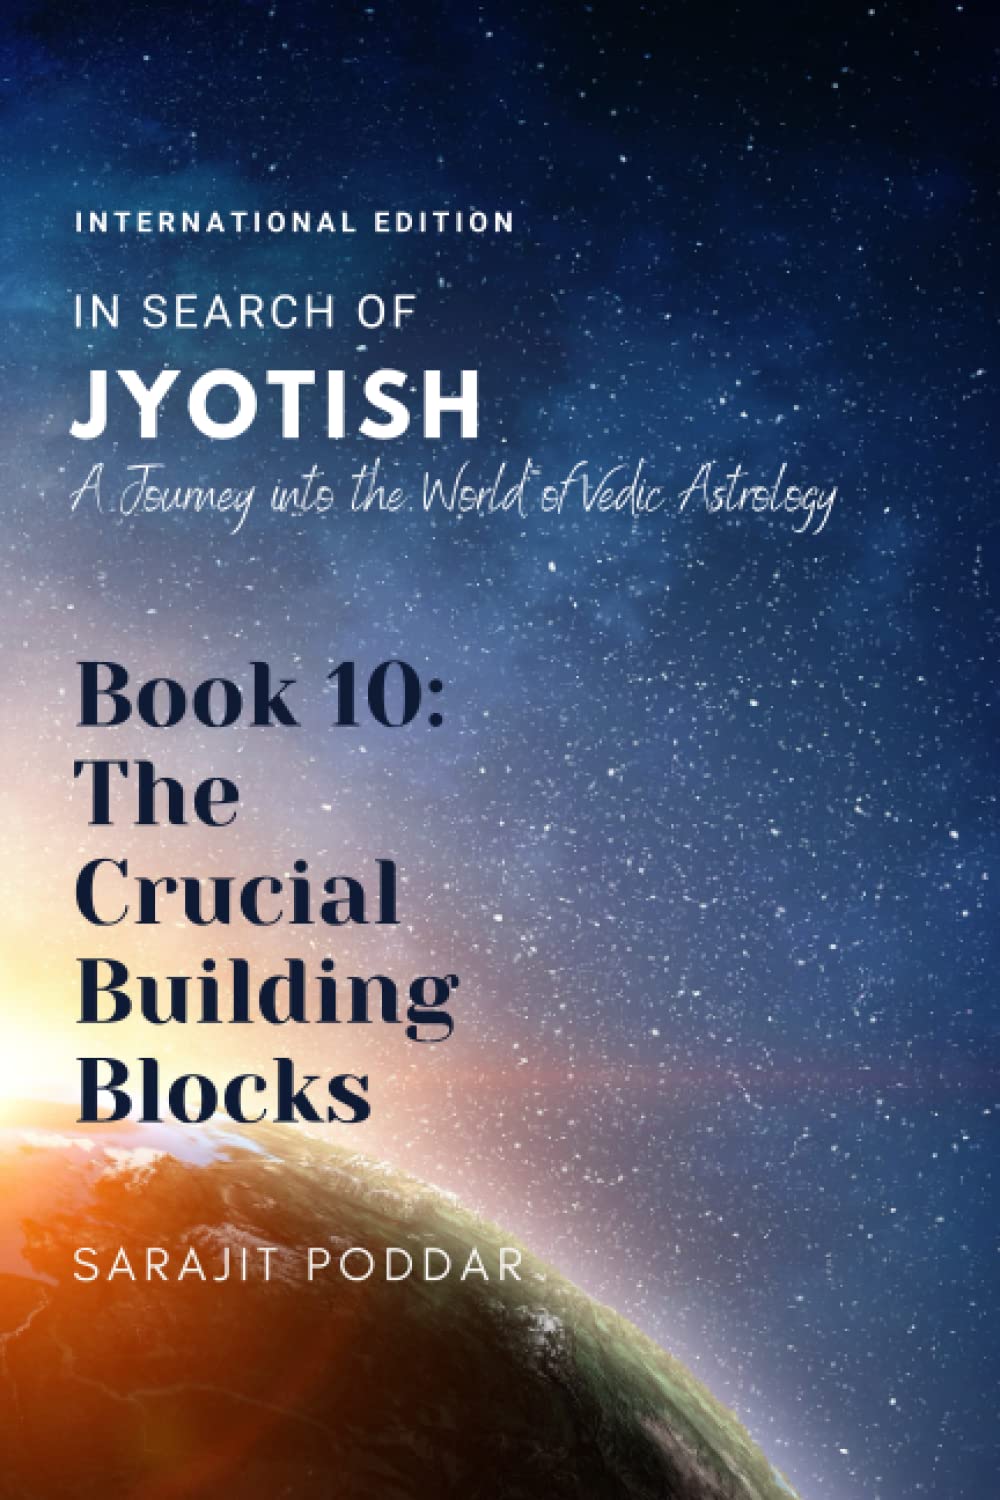 The Crucial Building Blocks: A Journey into the World of Vedic Astrology